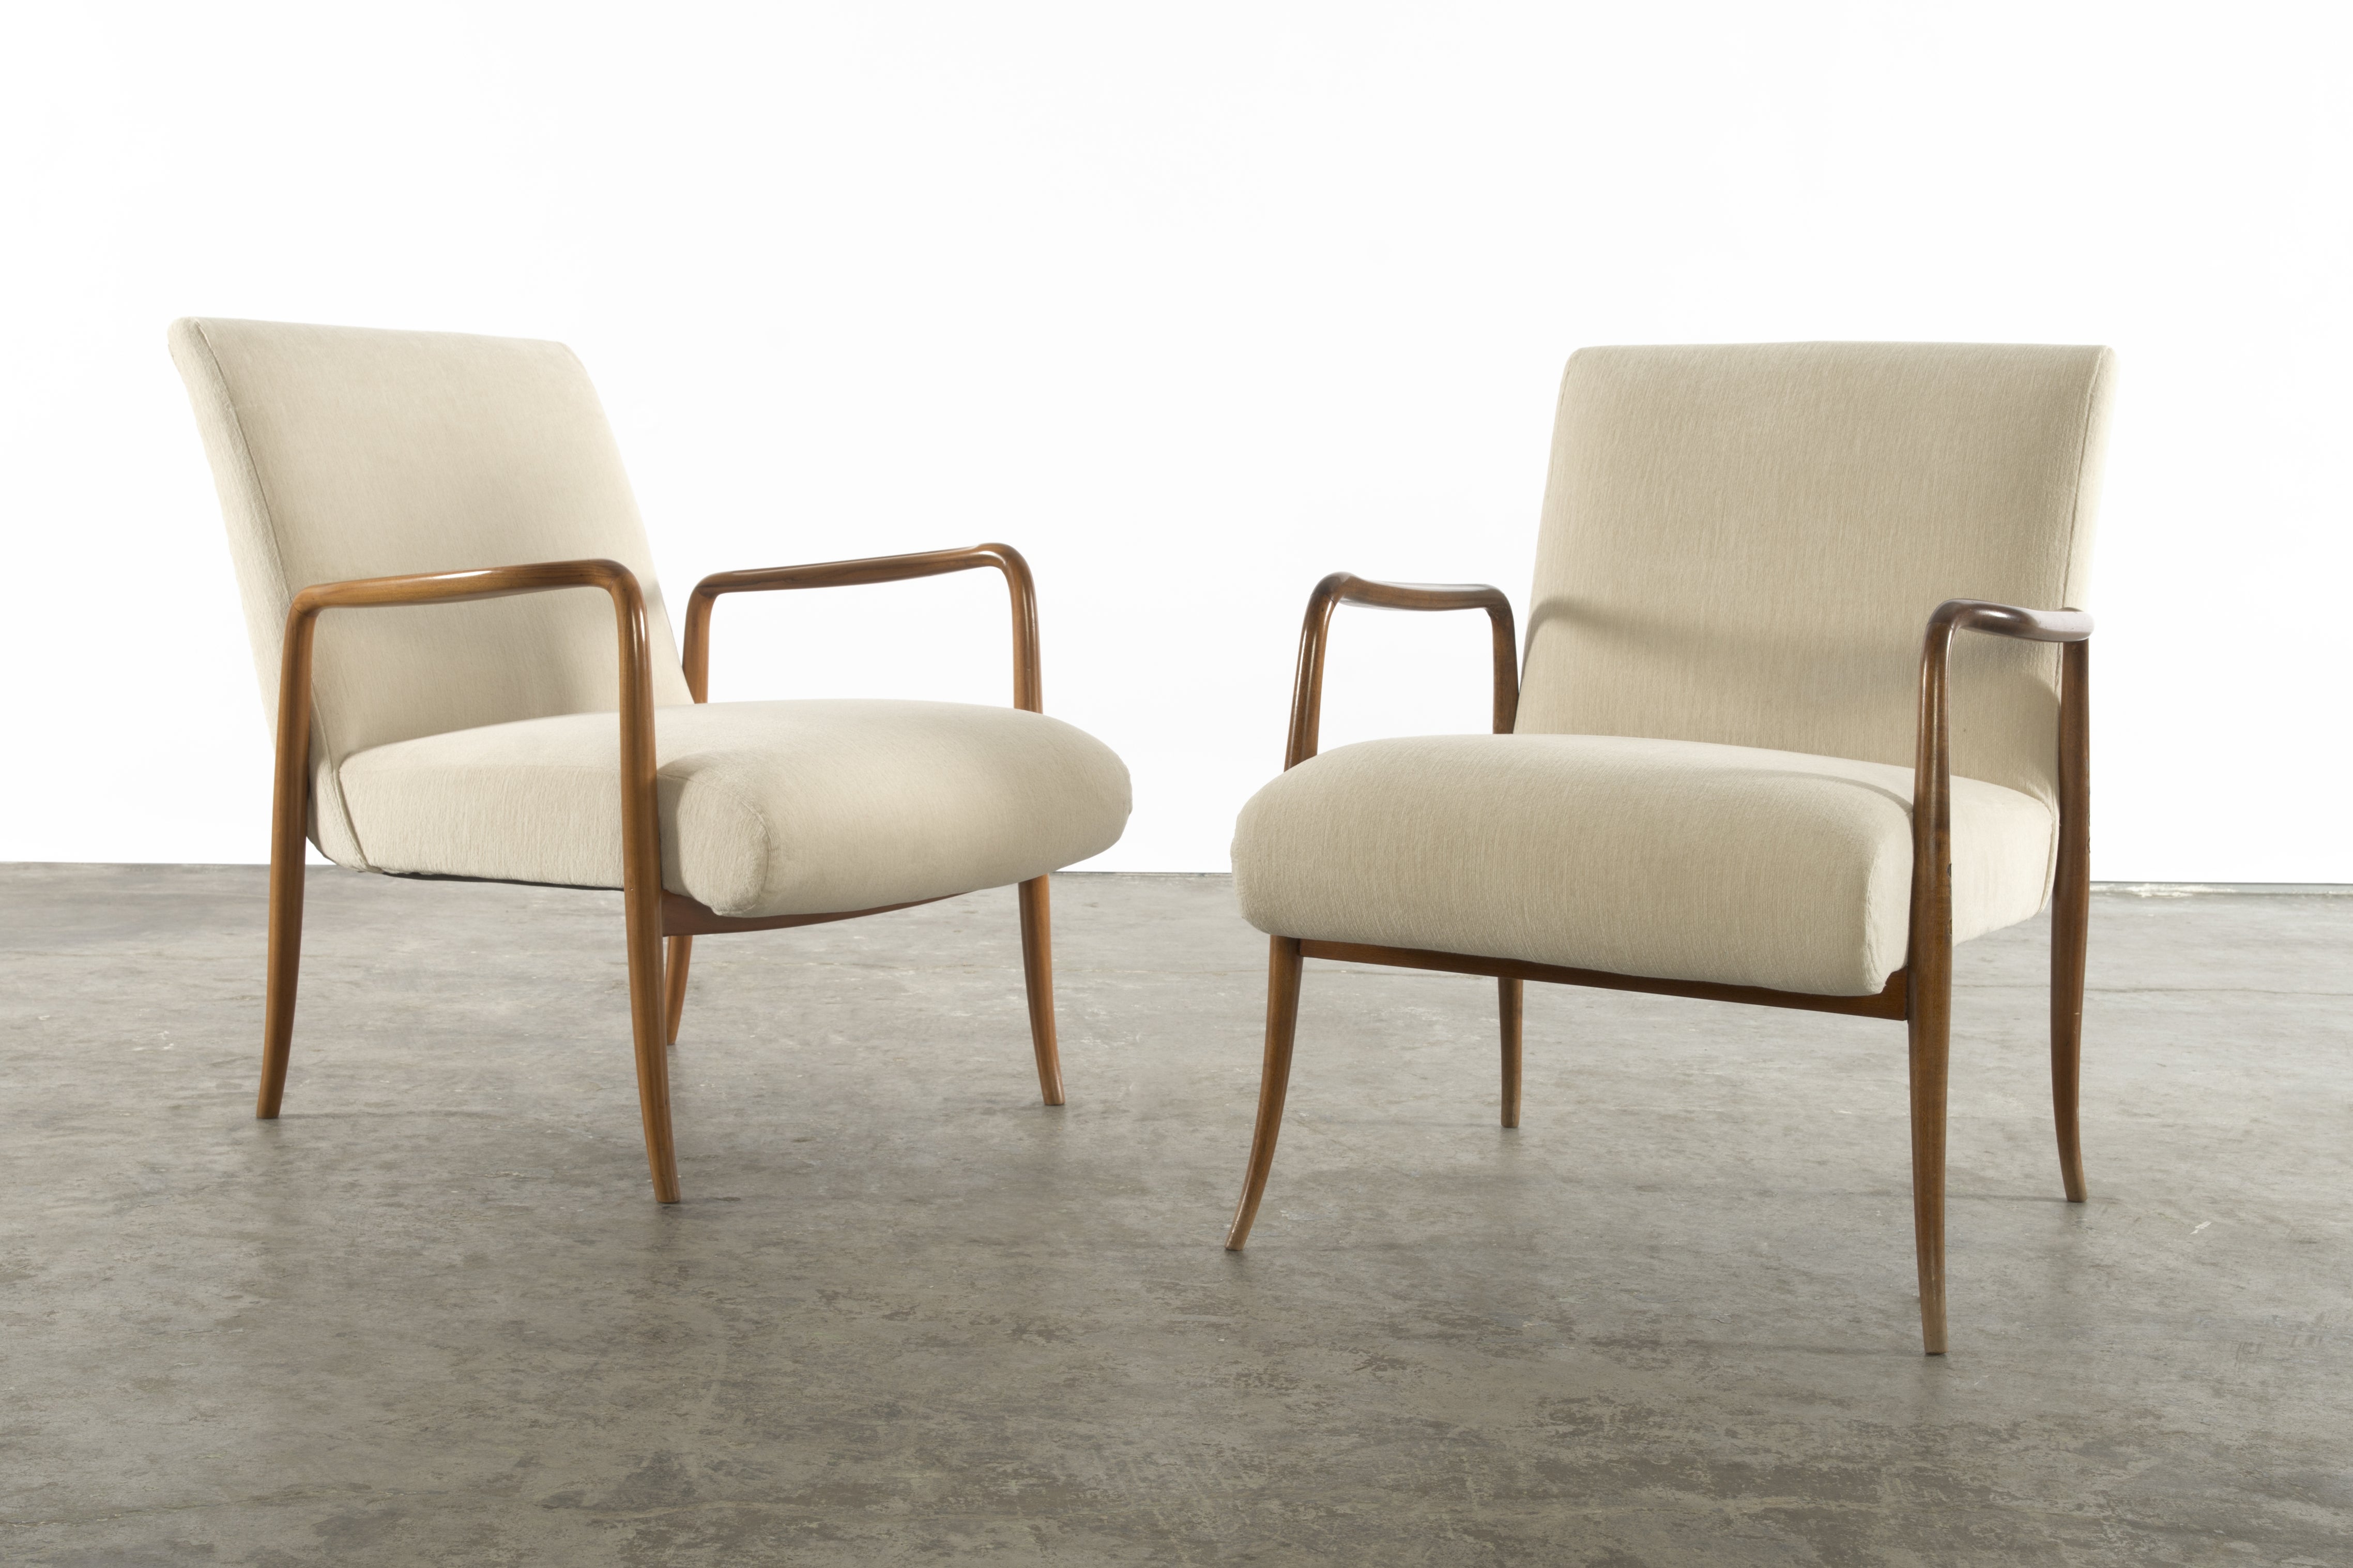 A pair of "light" chairs by Joaquim Tenreiro For Sale